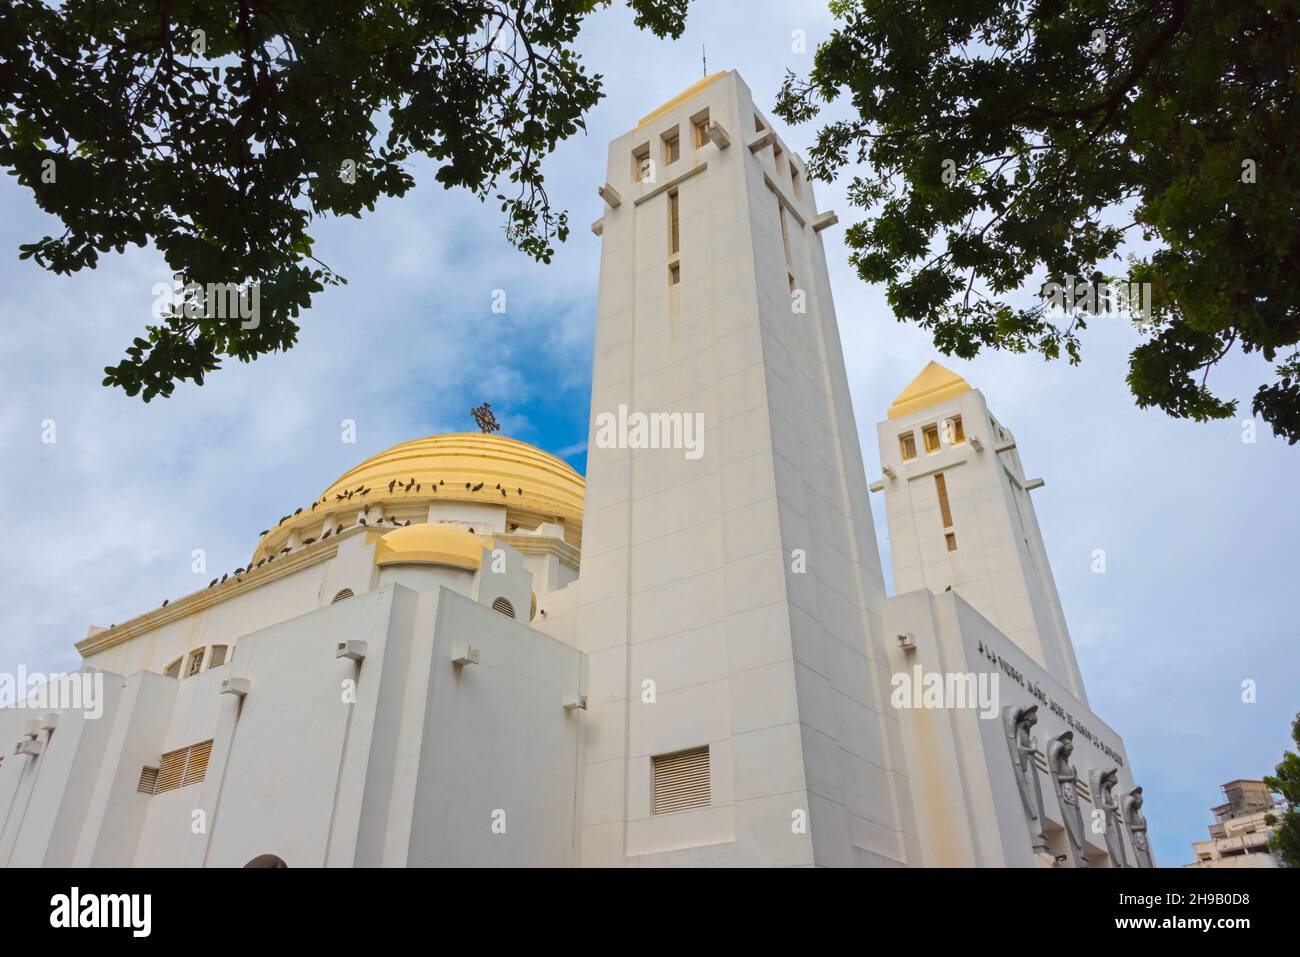 Our Lady of Victories Cathedral, Dakar, Senegal Stock Photo